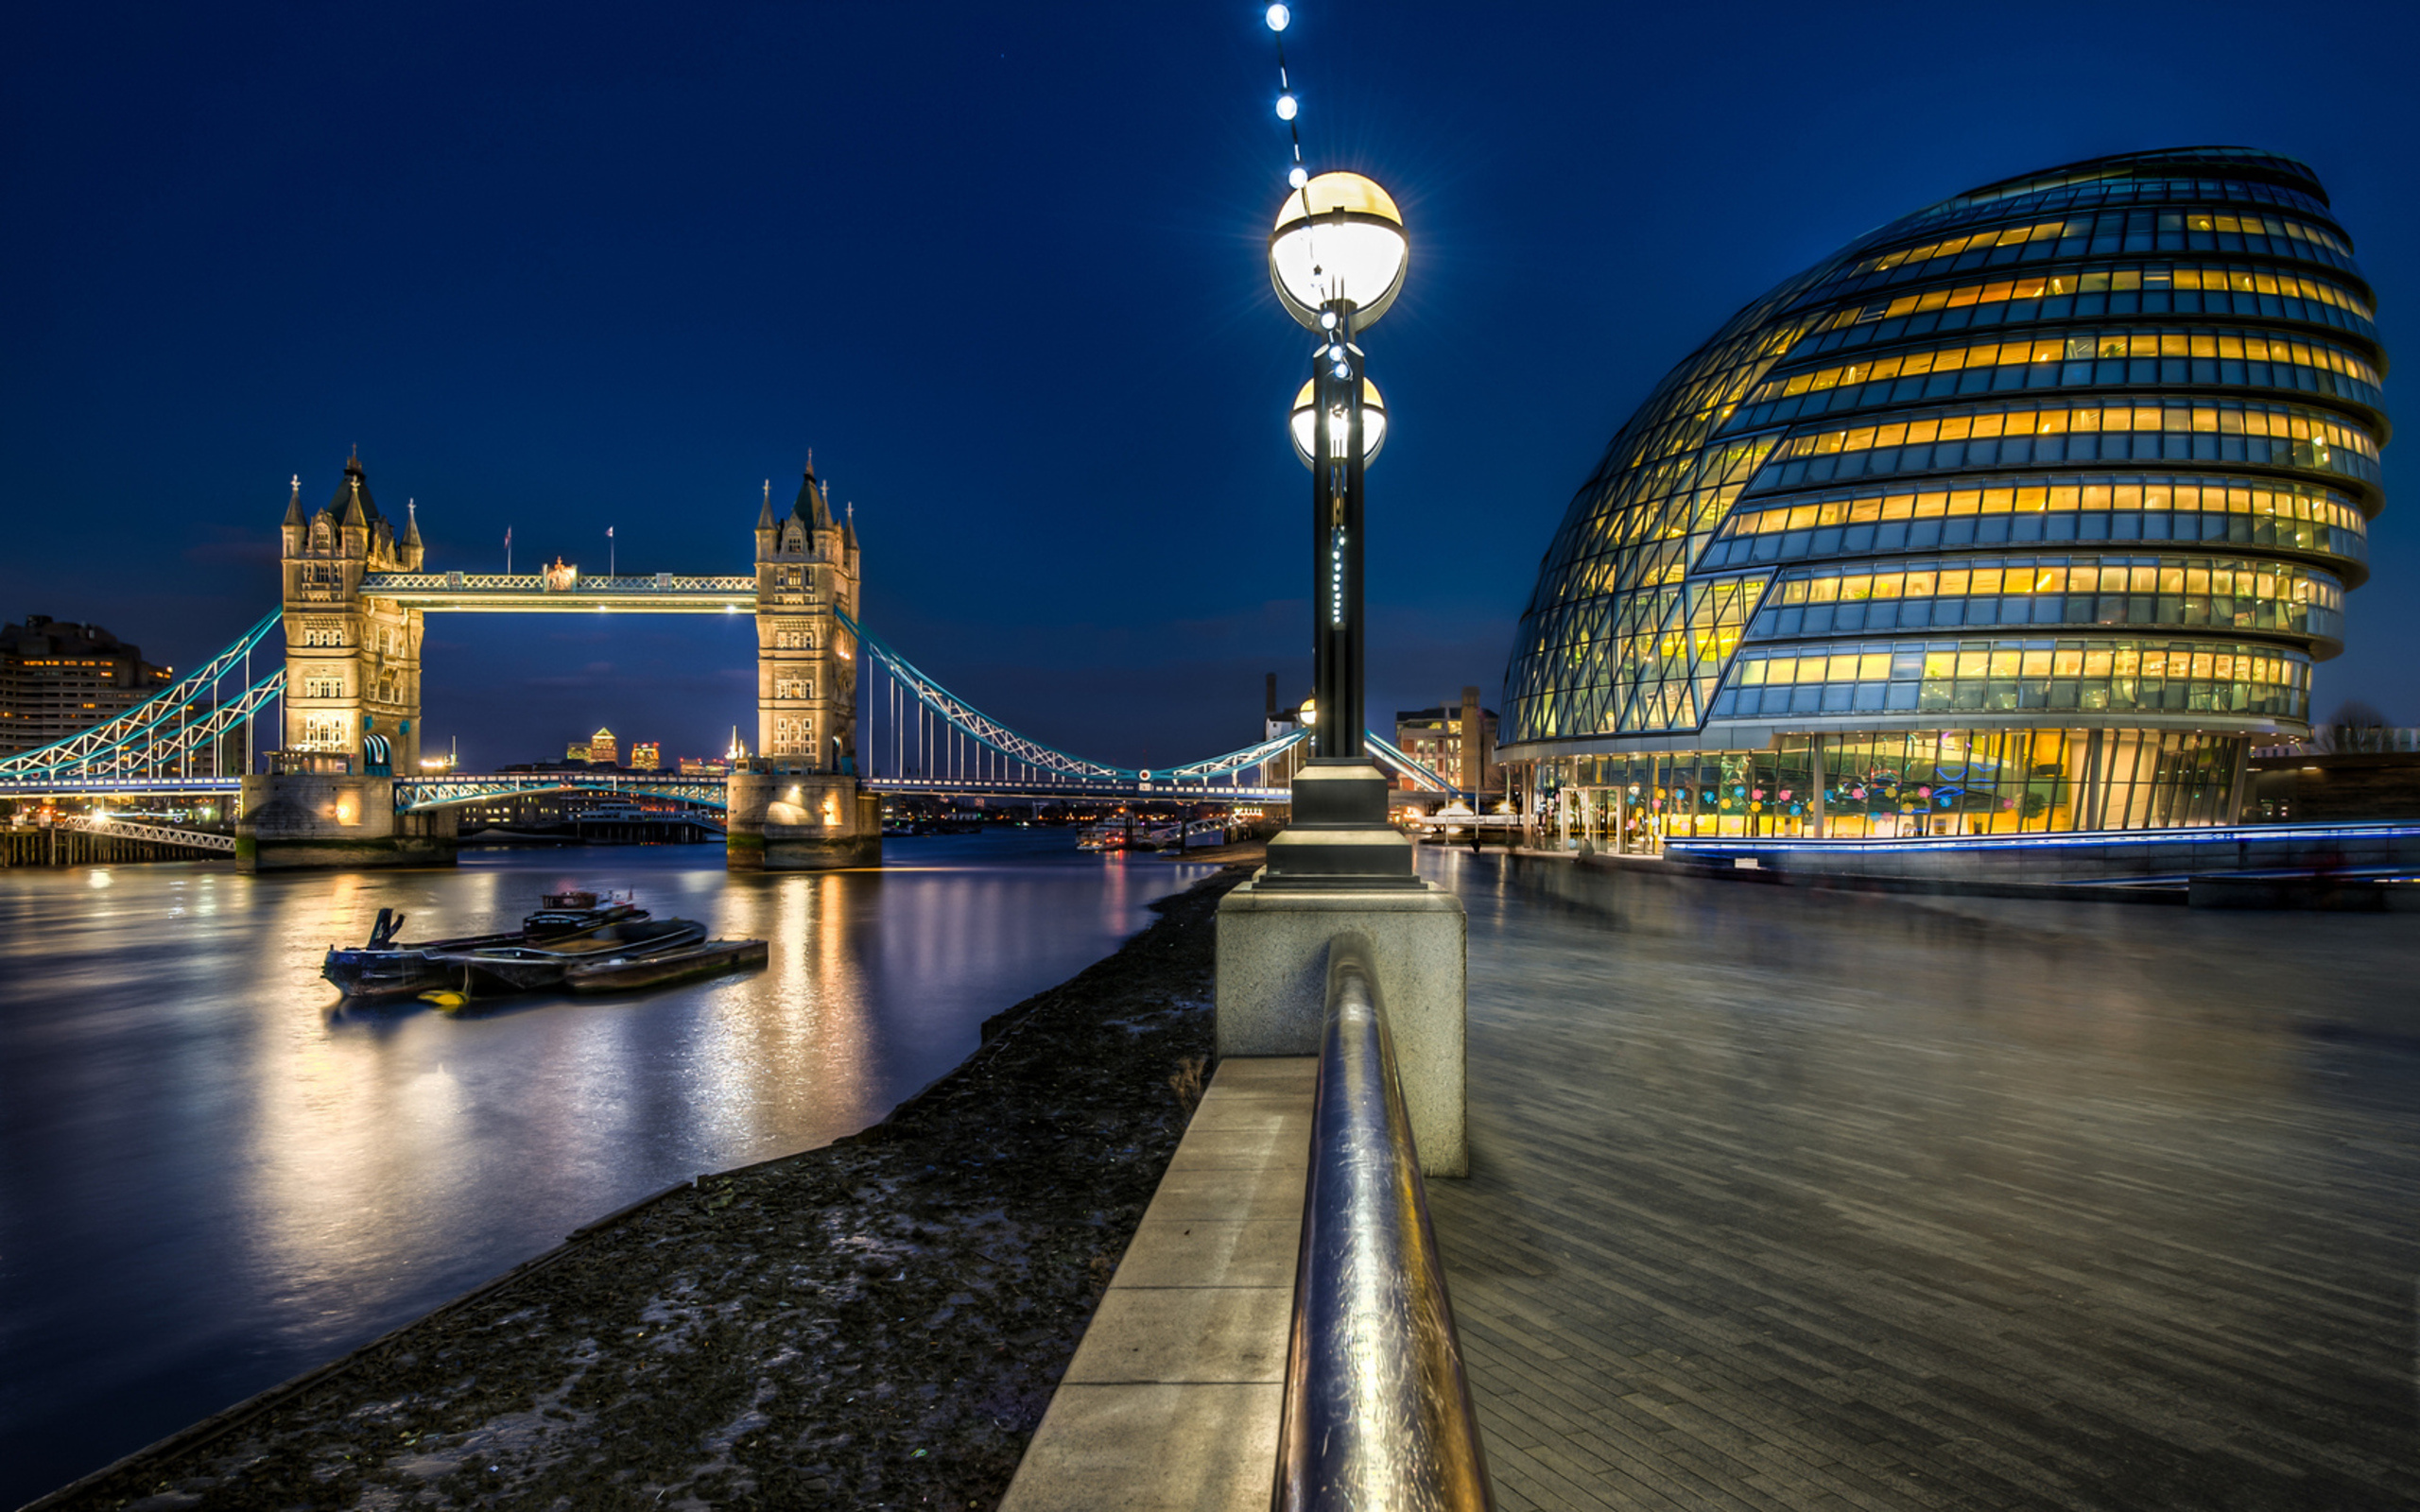 London: One of the pre-eminent financial centres of the world as the most important location for international finance. 2560x1600 HD Wallpaper.